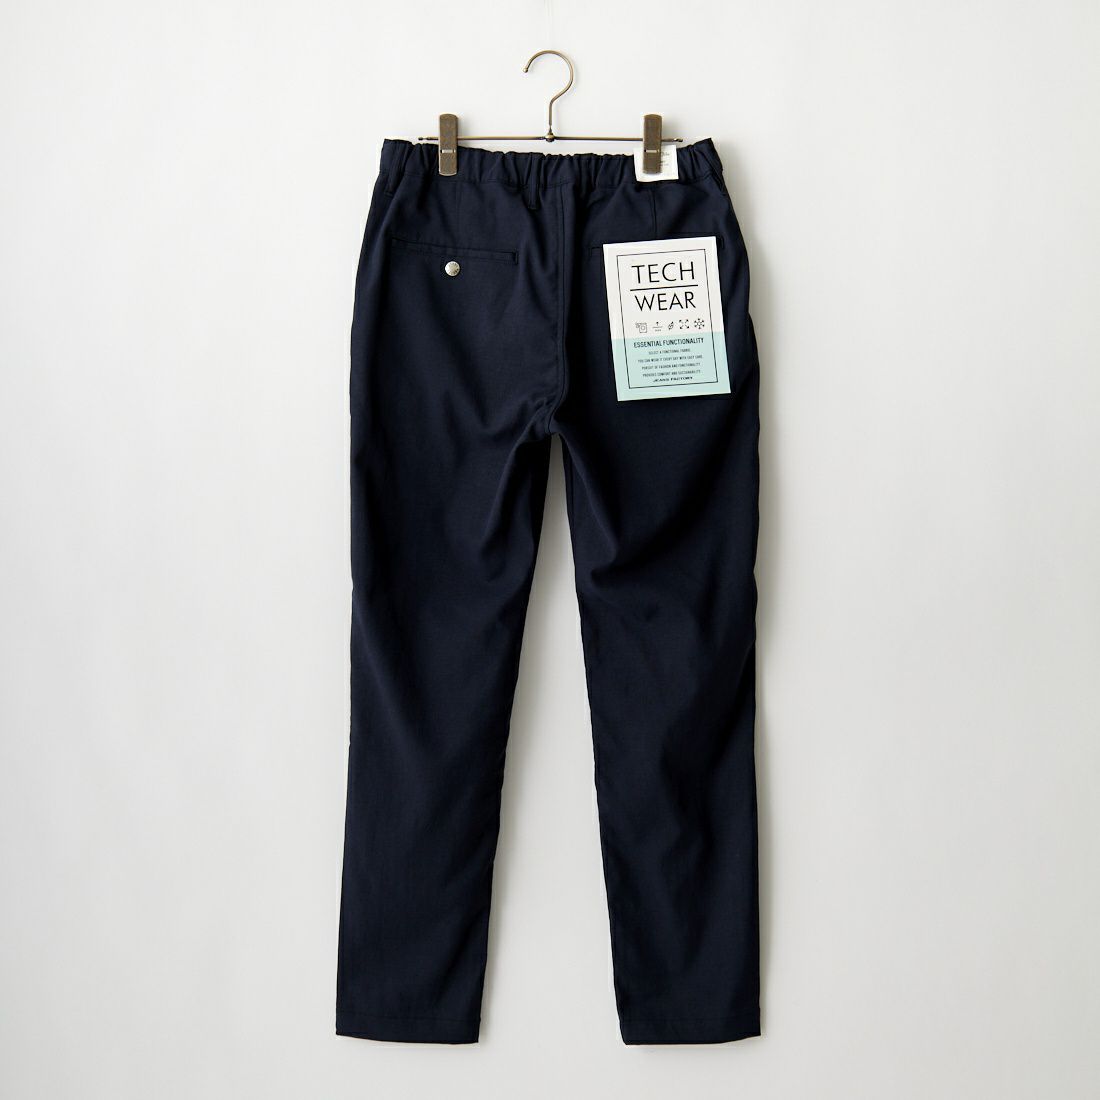 Jeans Factory Clothes [ジーンズファクトリークローズ